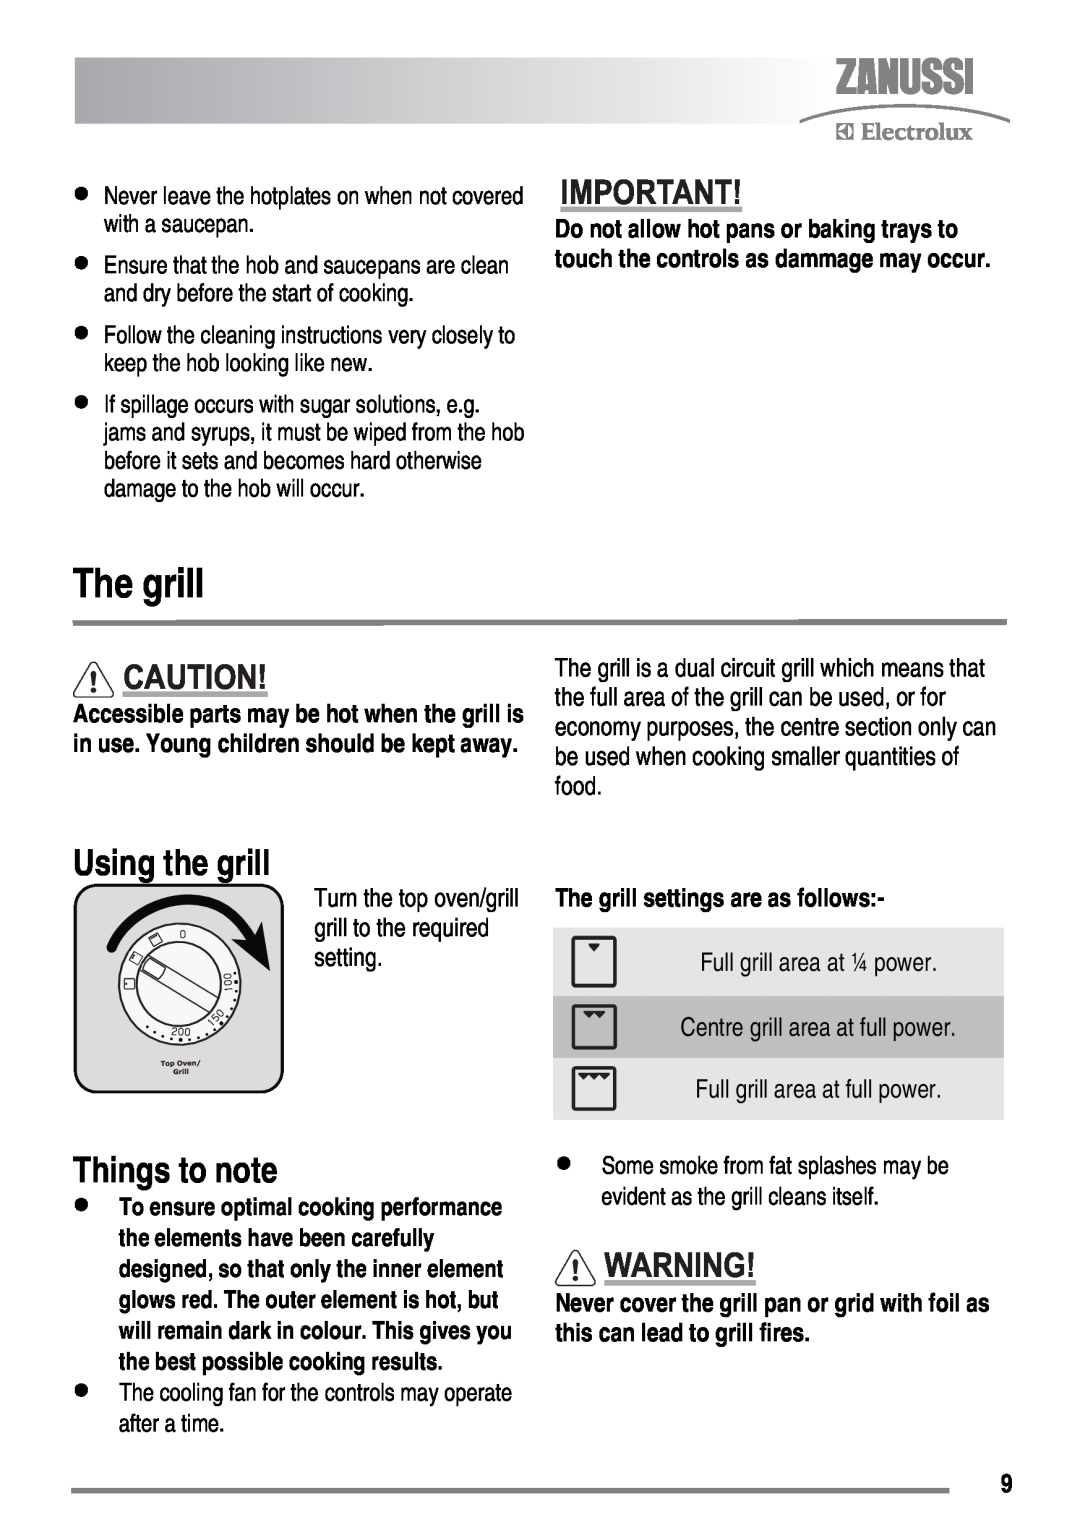 Zanussi ZKC6010 user manual Using the grill, Things to note, The grill settings are as follows 